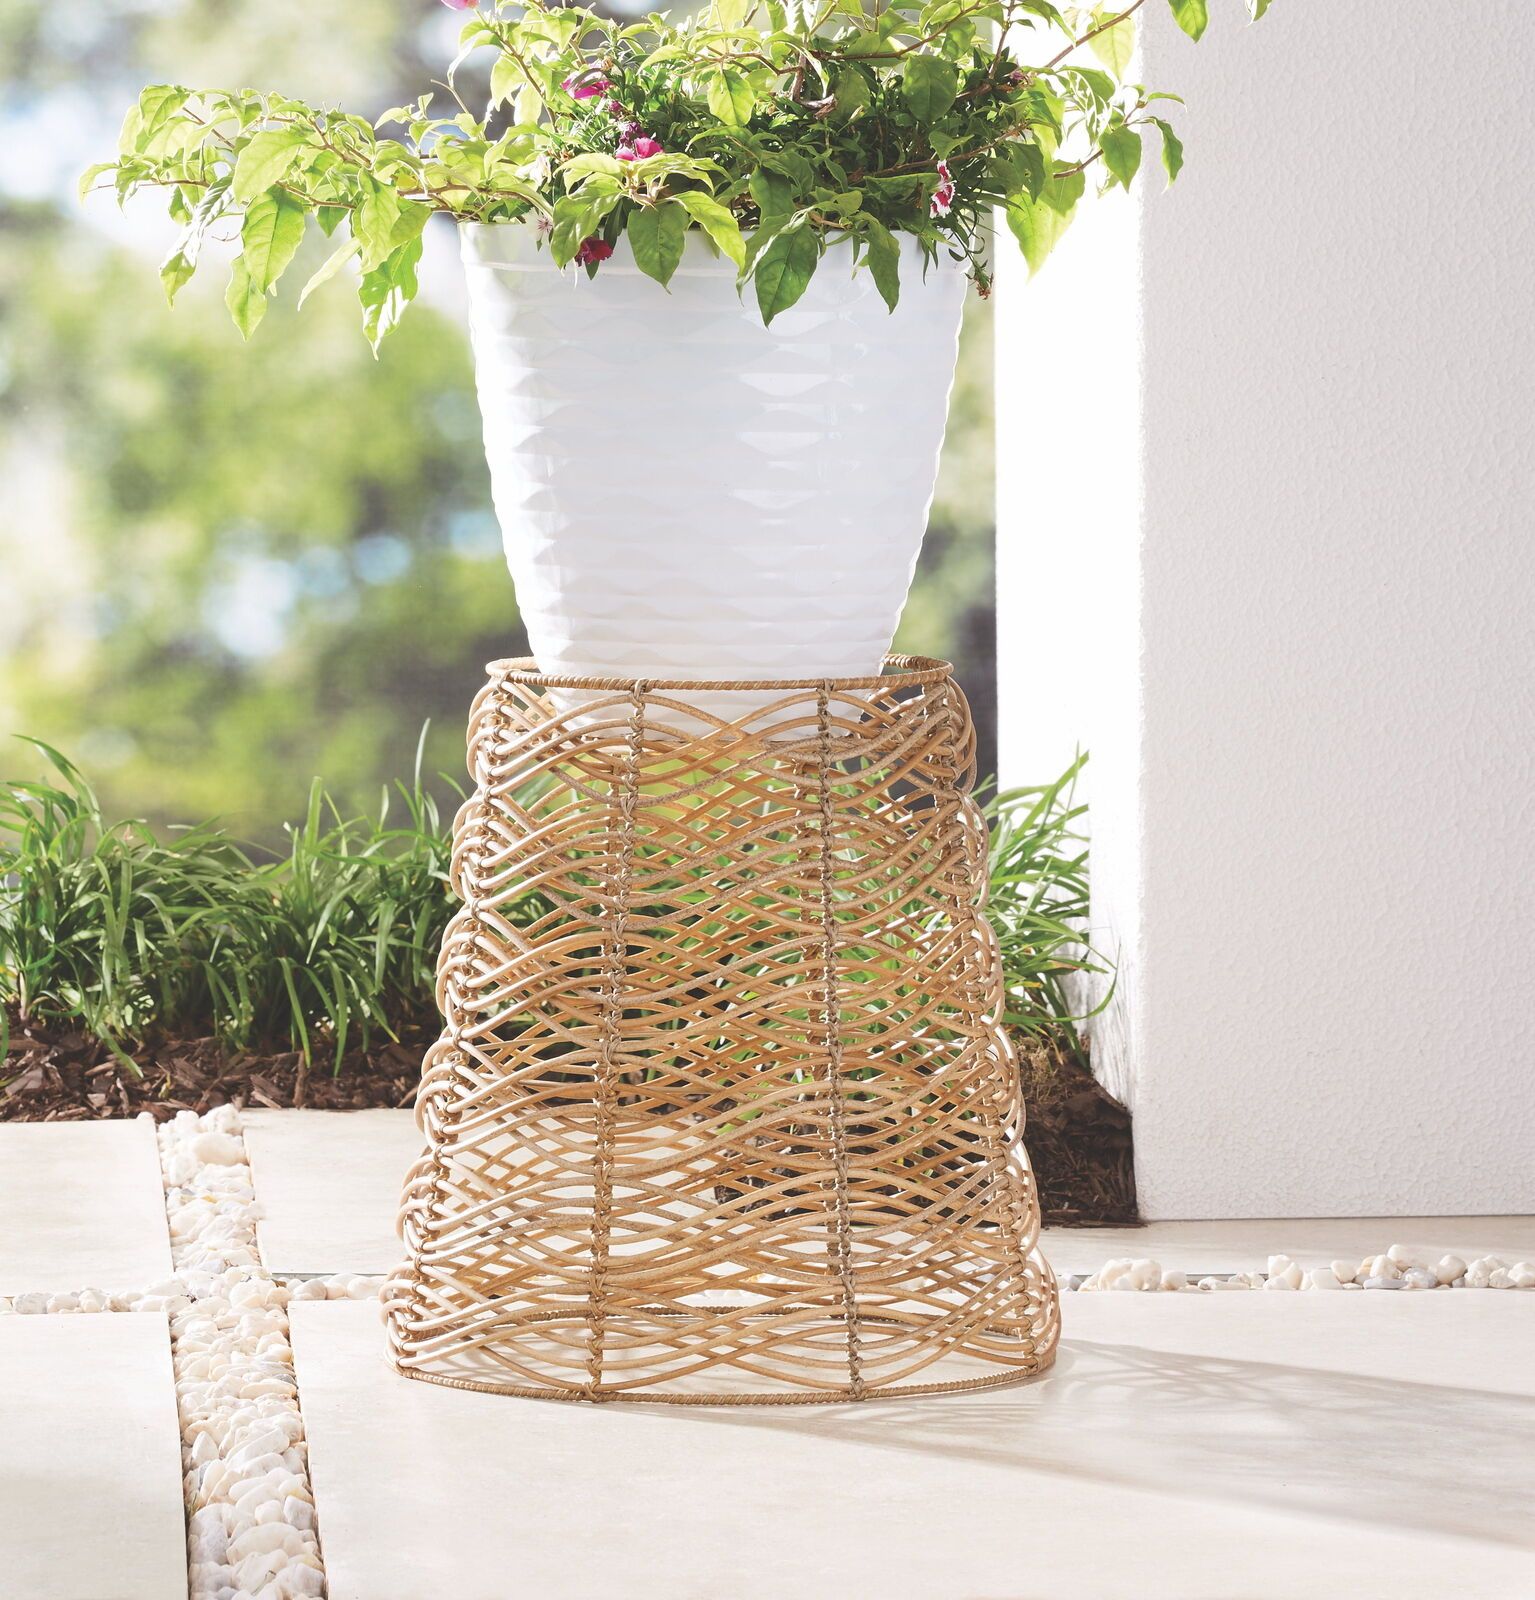 Ventura Resin Rattan Woven Plant Stand With Metal Frame Indoor Outdoor  Decor New | Ebay In Resin Plant Stands (View 9 of 15)